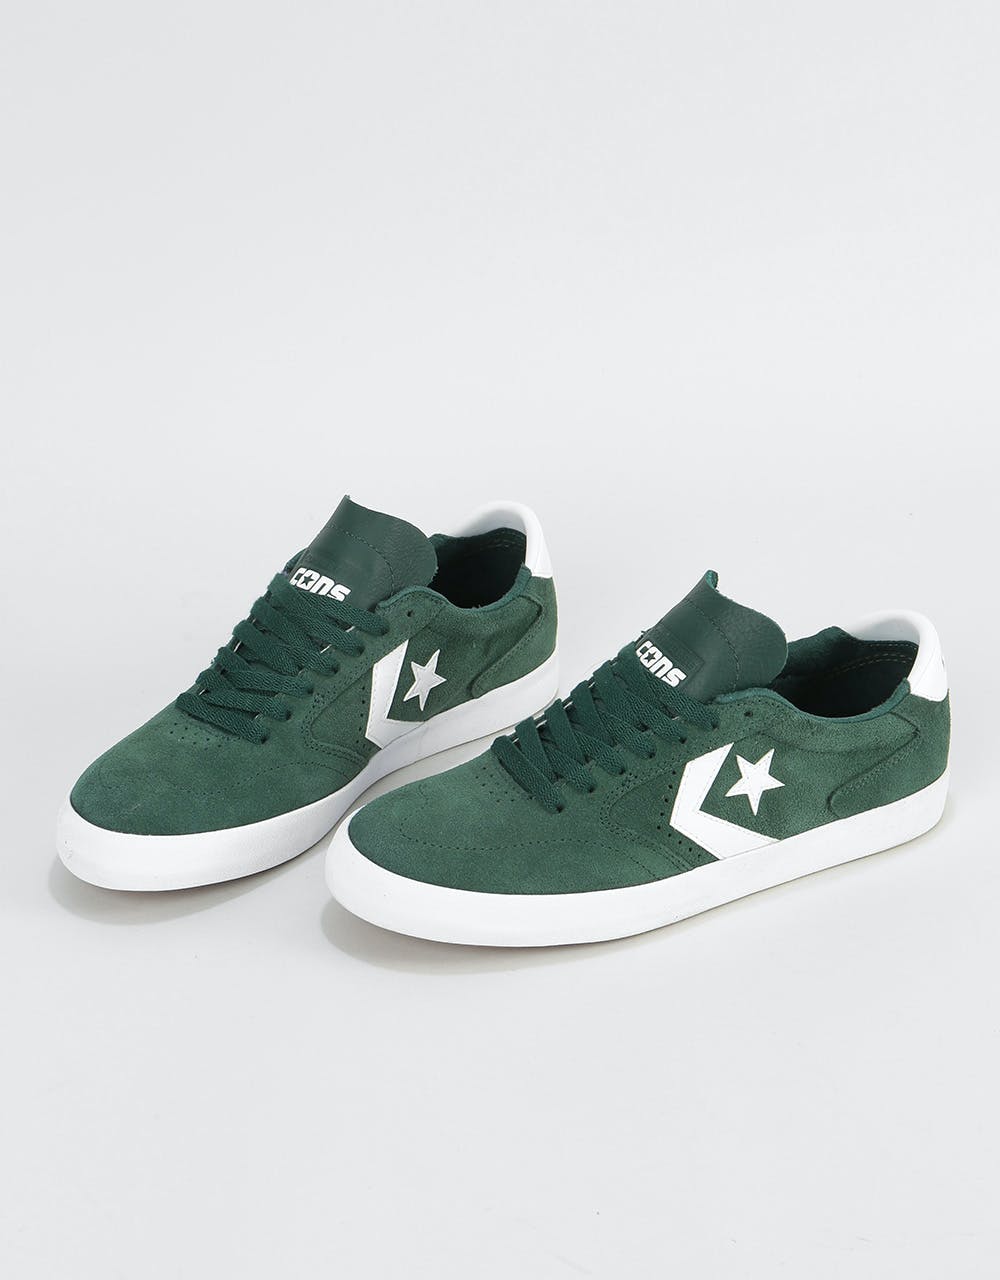 Converse Checkpoint Pro Ox Skate Shoes - Deep Emerald/White/White